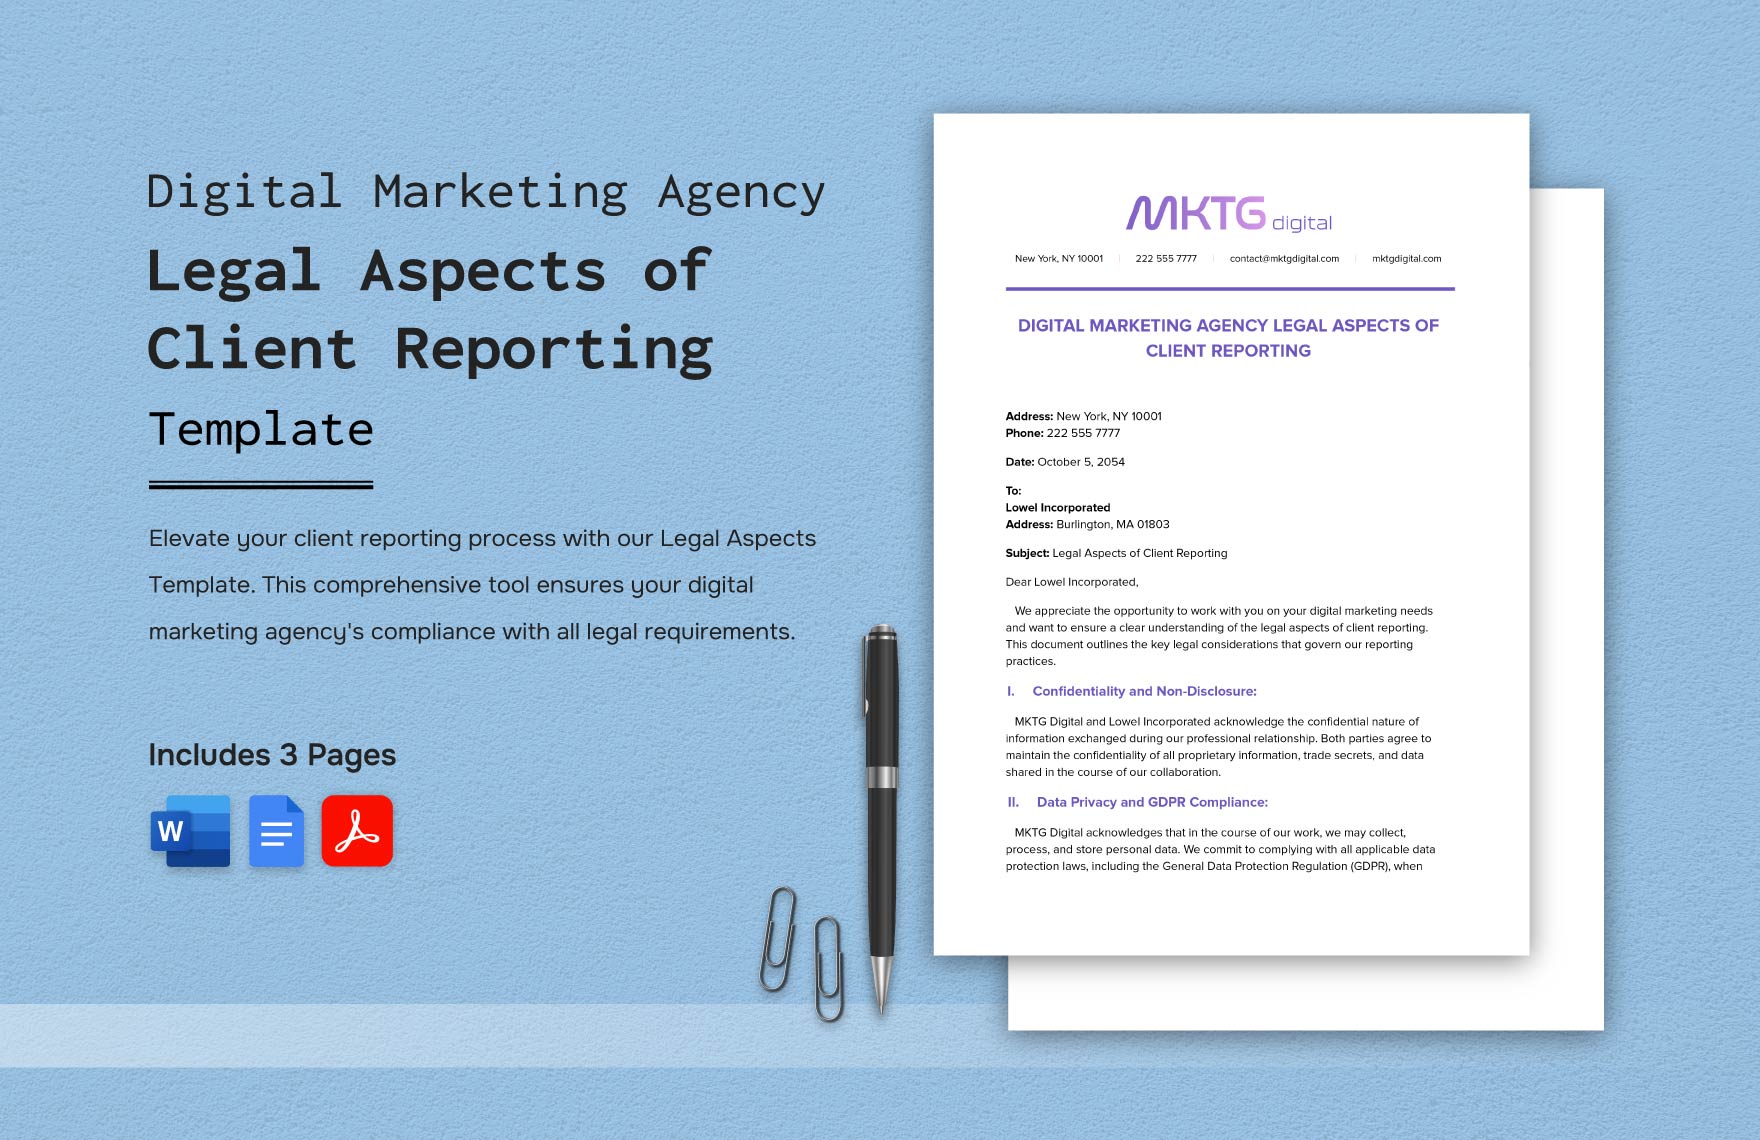 Digital Marketing Agency Legal Aspects of Client Reporting Template